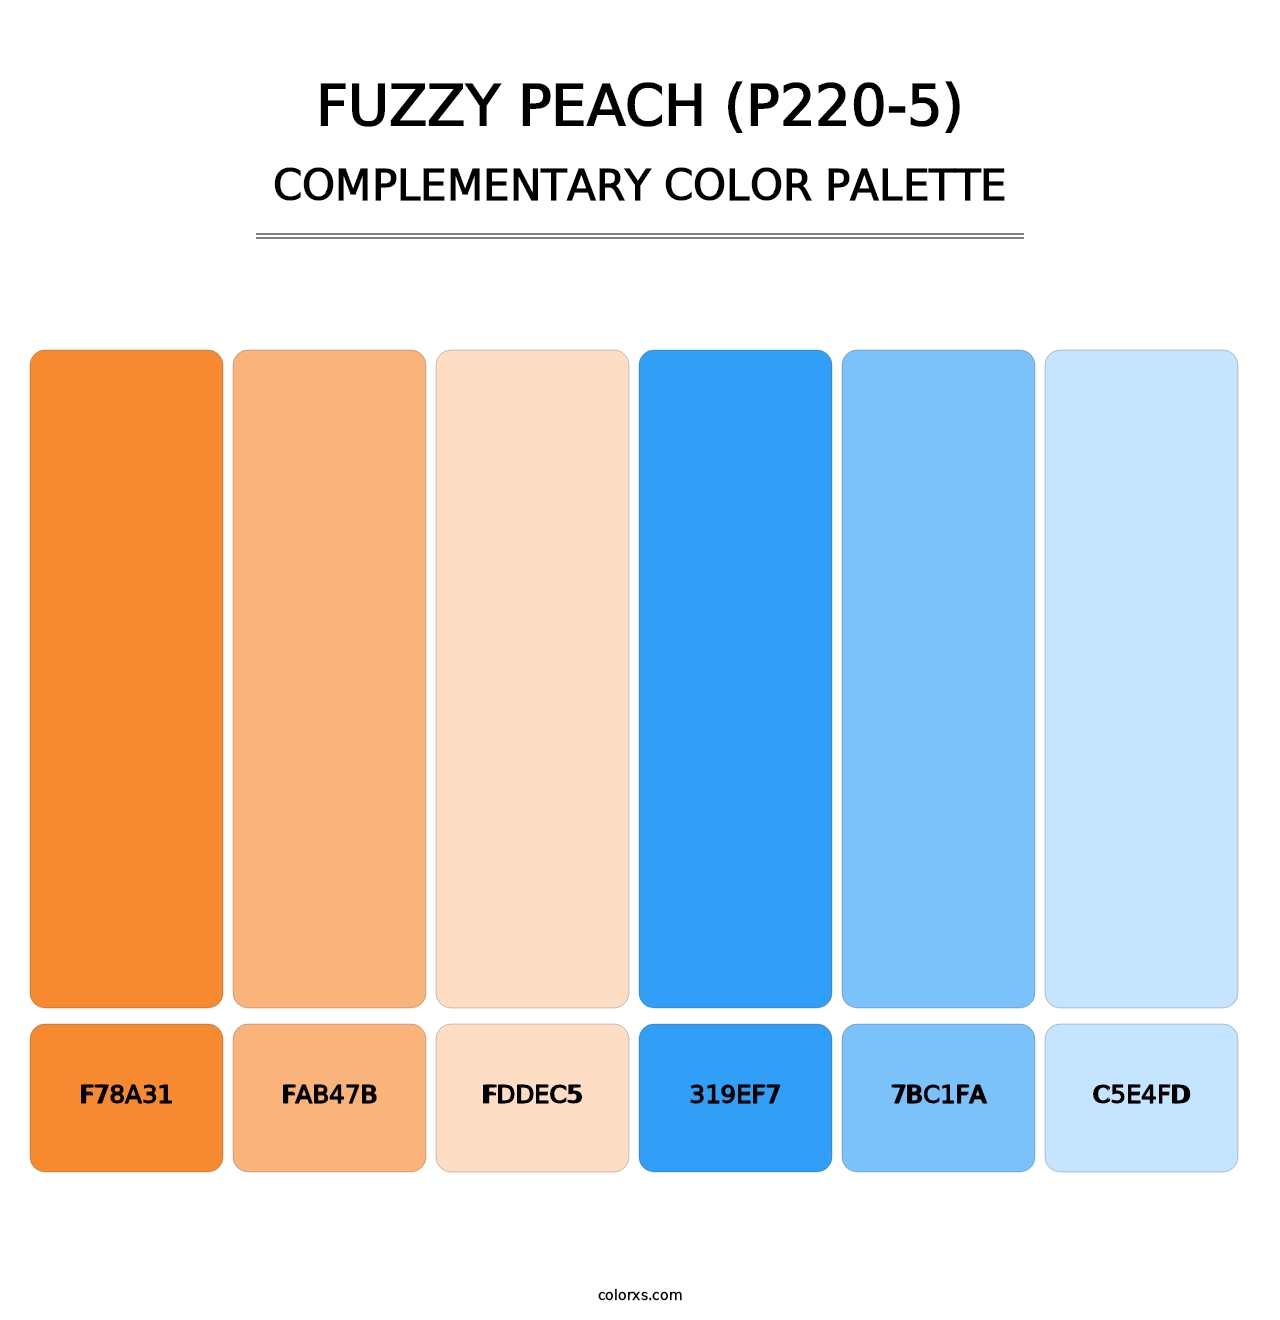 Fuzzy Peach (P220-5) - Complementary Color Palette